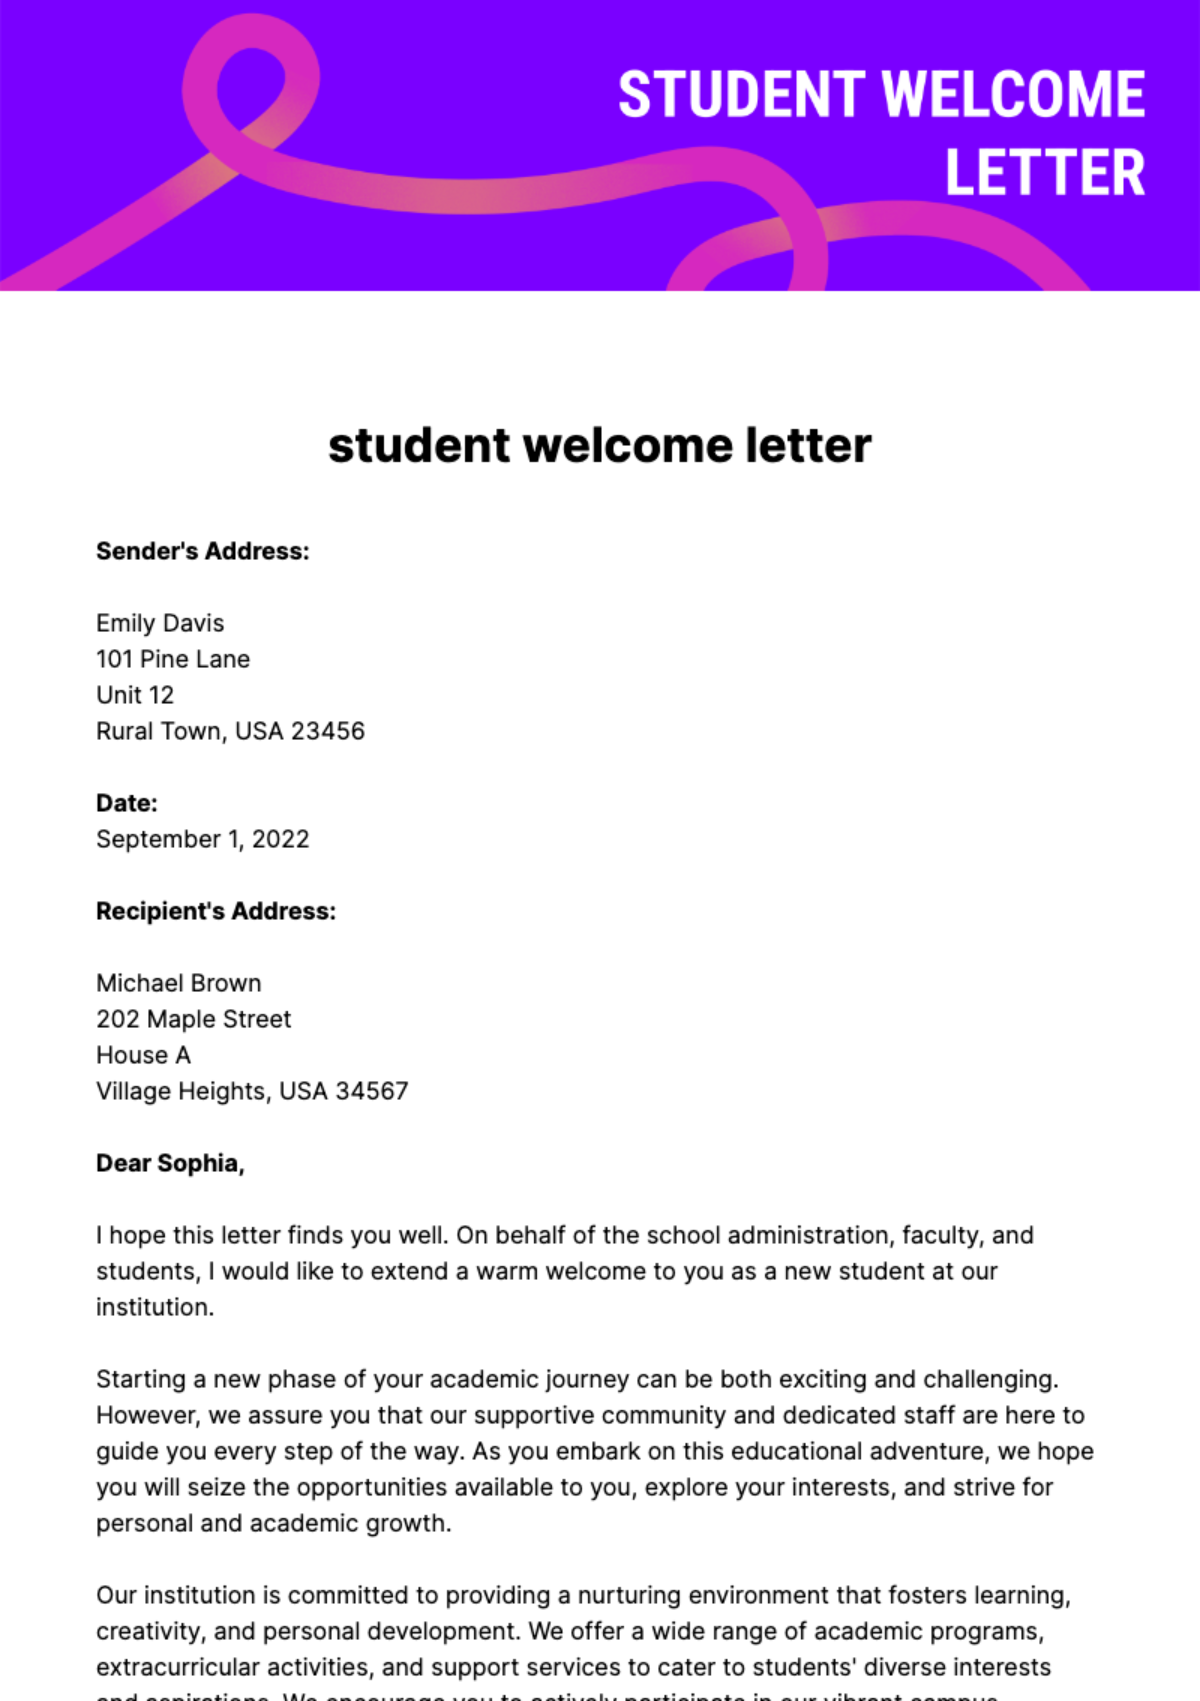 Free student welcome letter Template